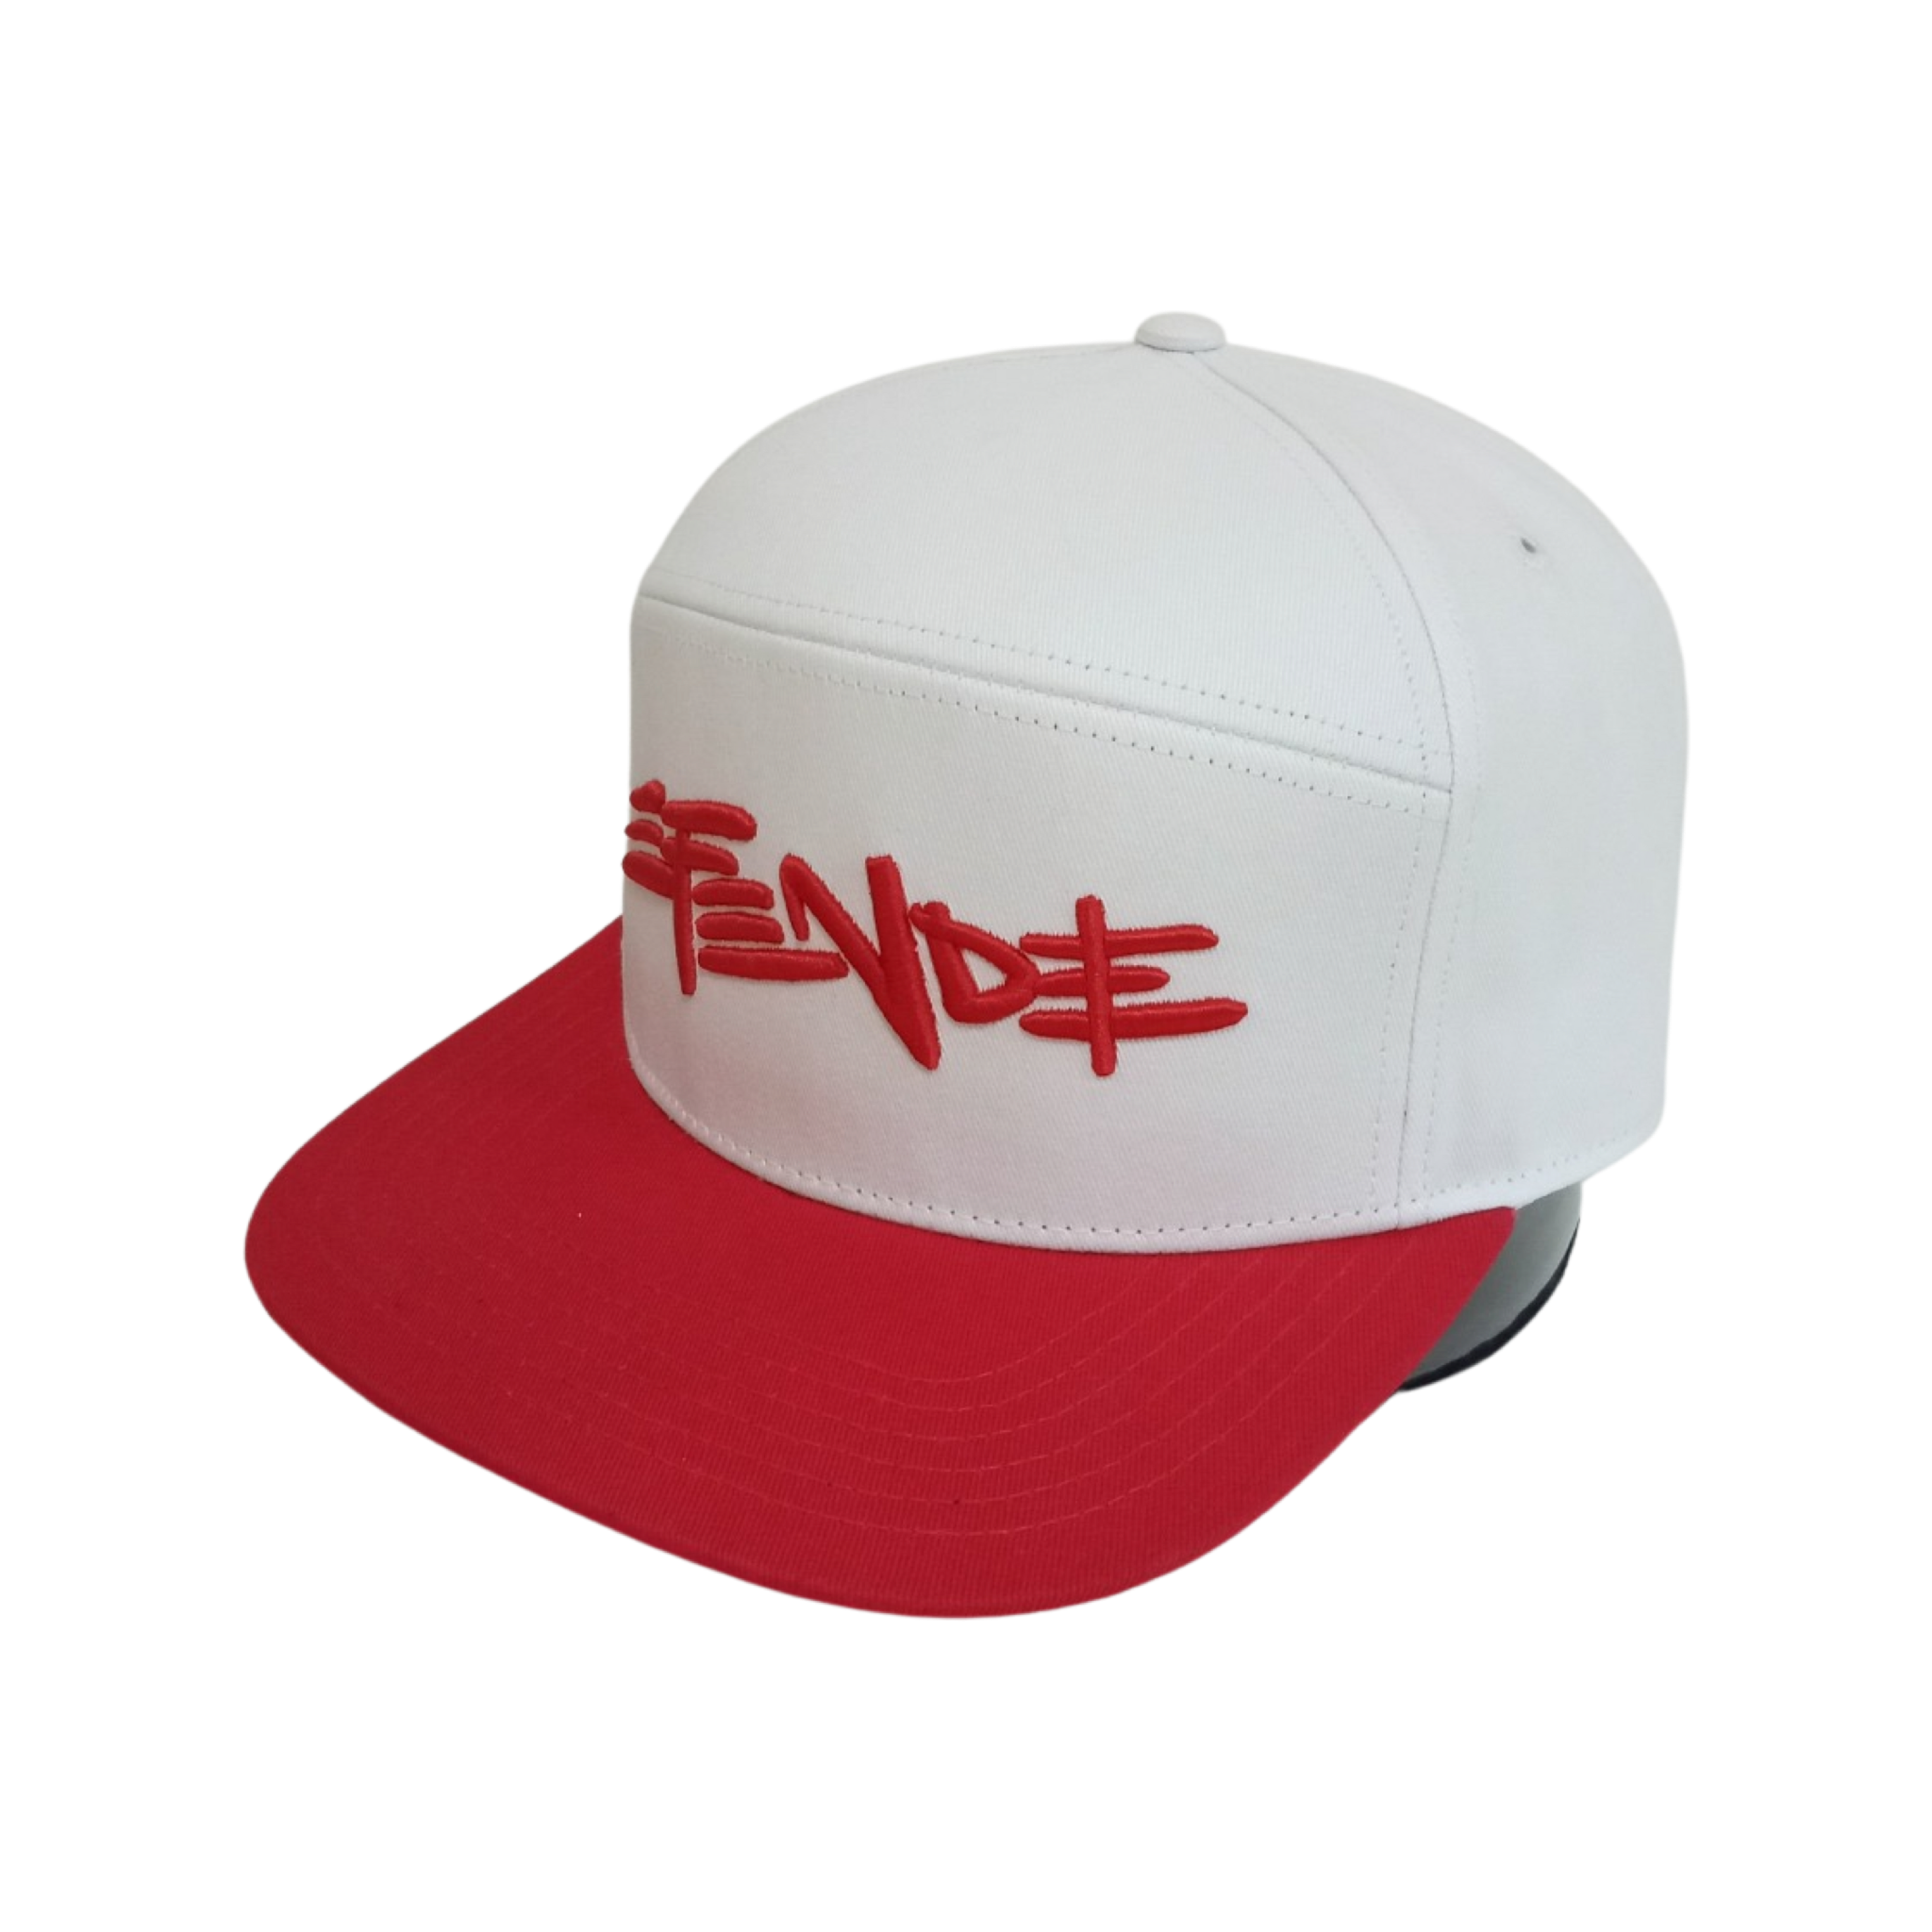 EFENDEE 7 Panel Hat - Red and White